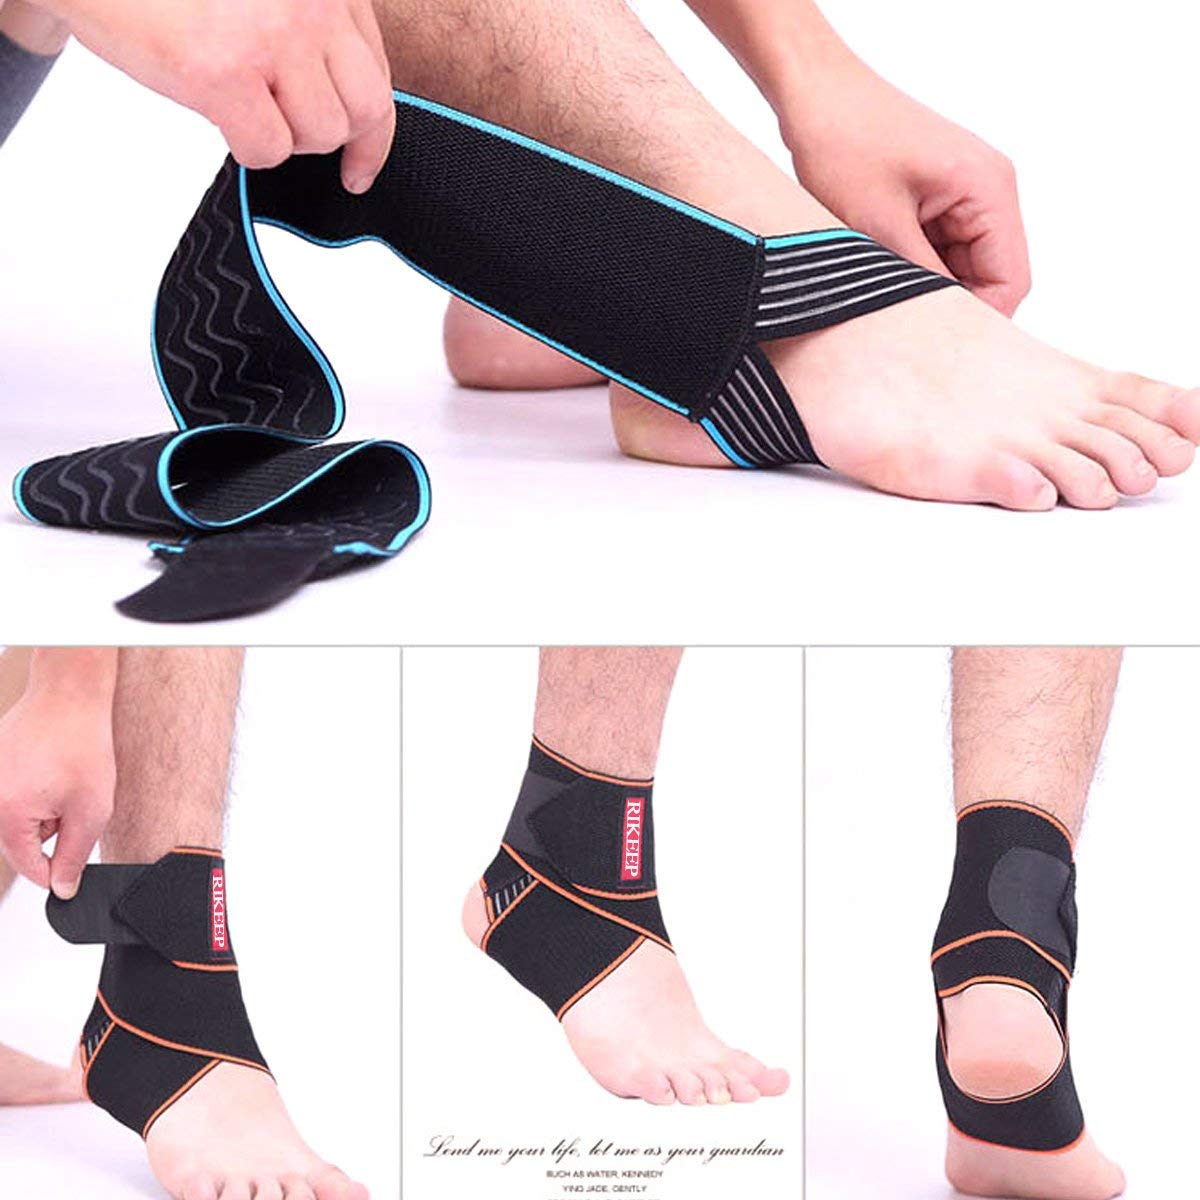 Candy Li Ankle Support Review